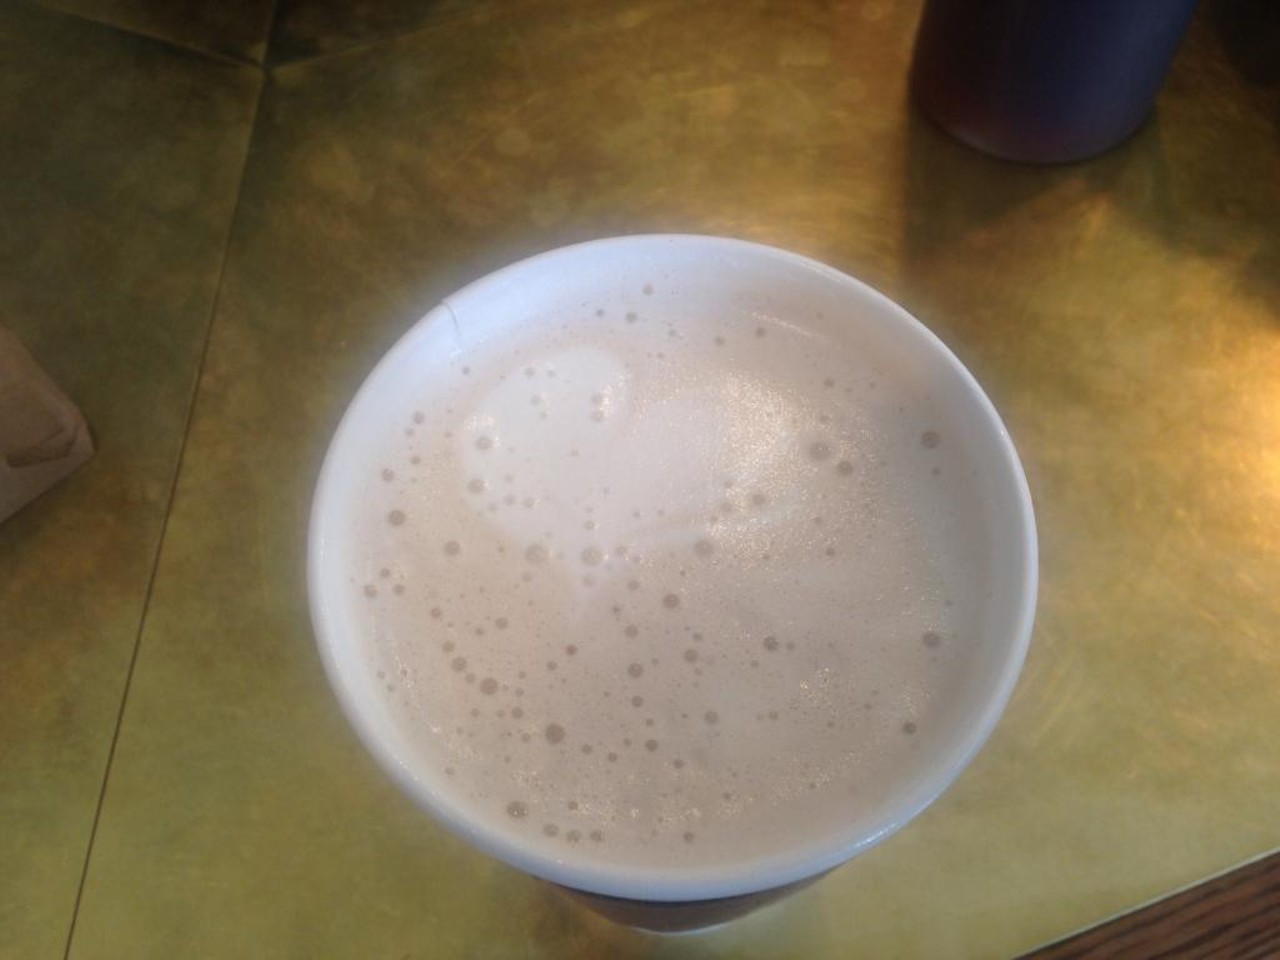 The Root Cafe in Lakewood has a Mexican Cocoa that is out of control good. Made with cinnamon, cayenne, and a touch a vanilla this should not be missed. Get a cup today at 15118 Detroit Ave., Lakewood, 216.226.4401.